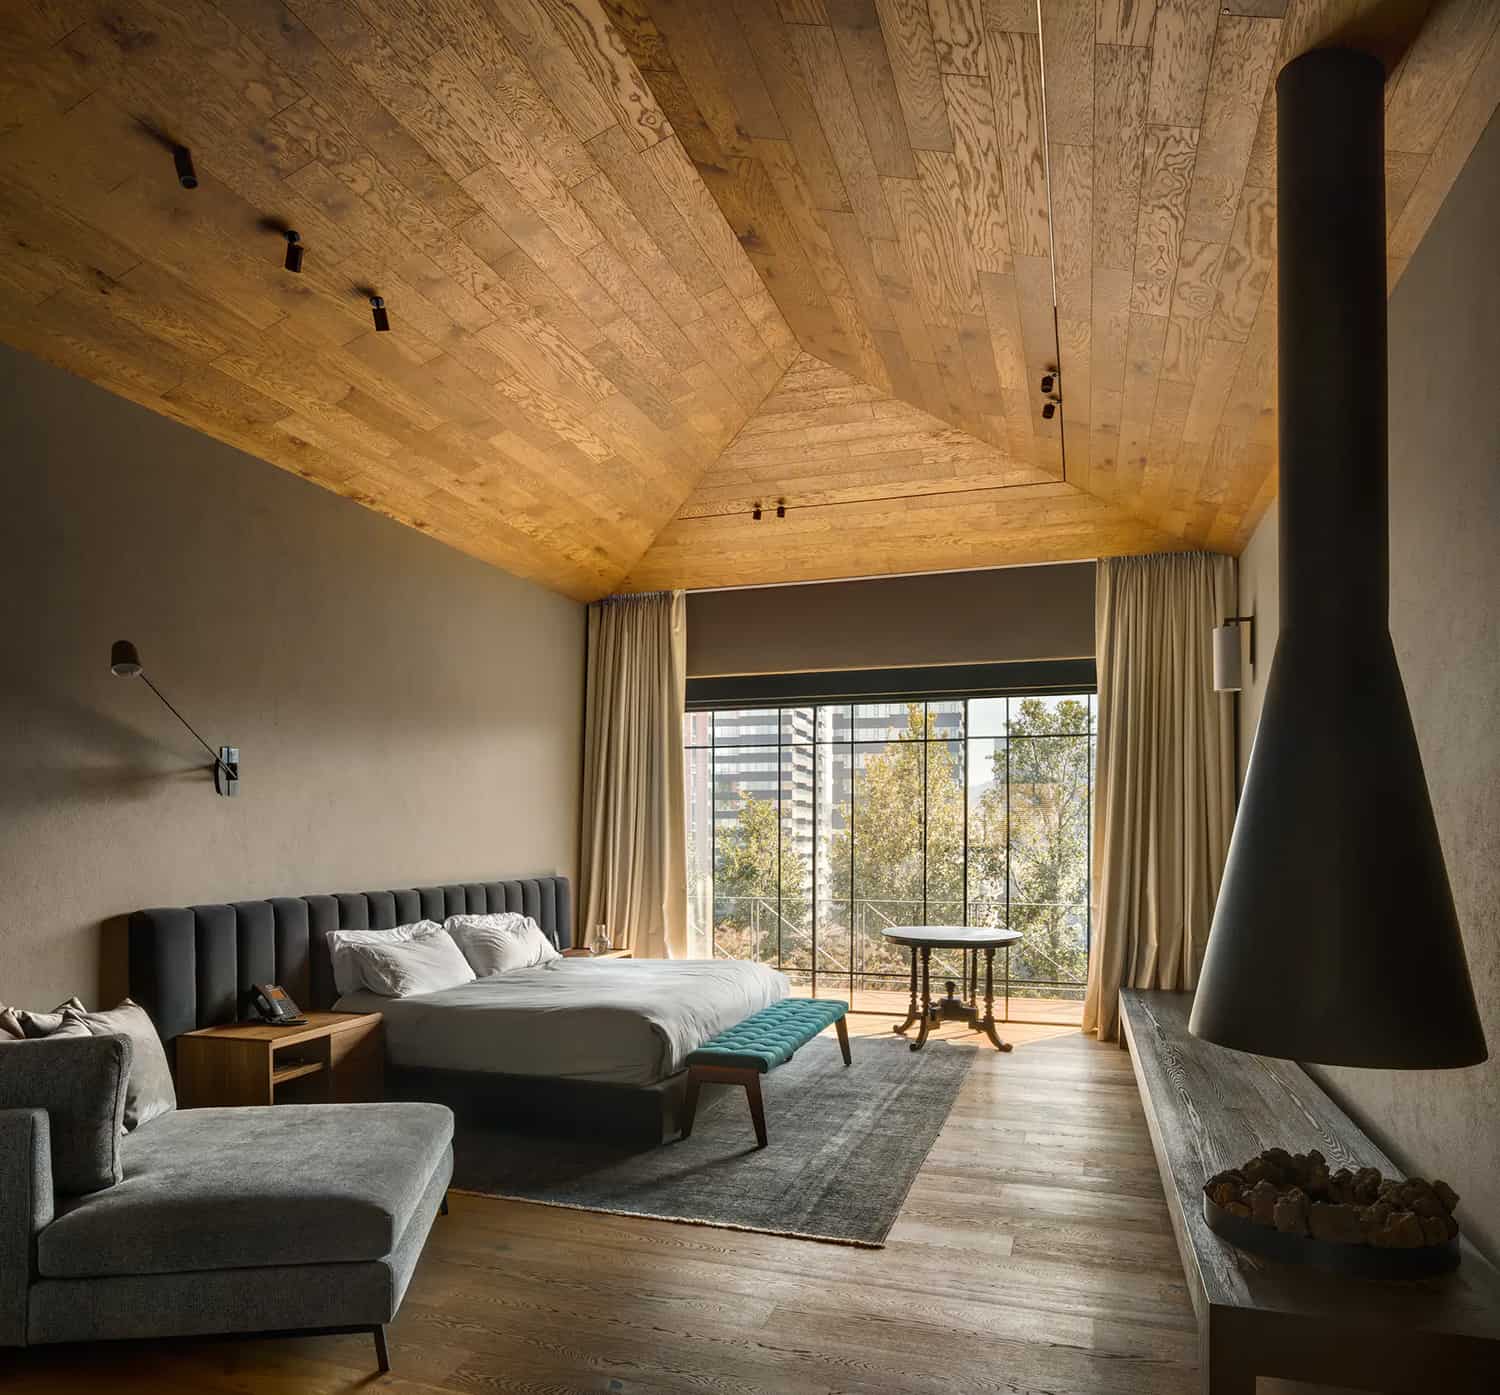 Modern meets rustic in this absolutely spectacular Mexico City home